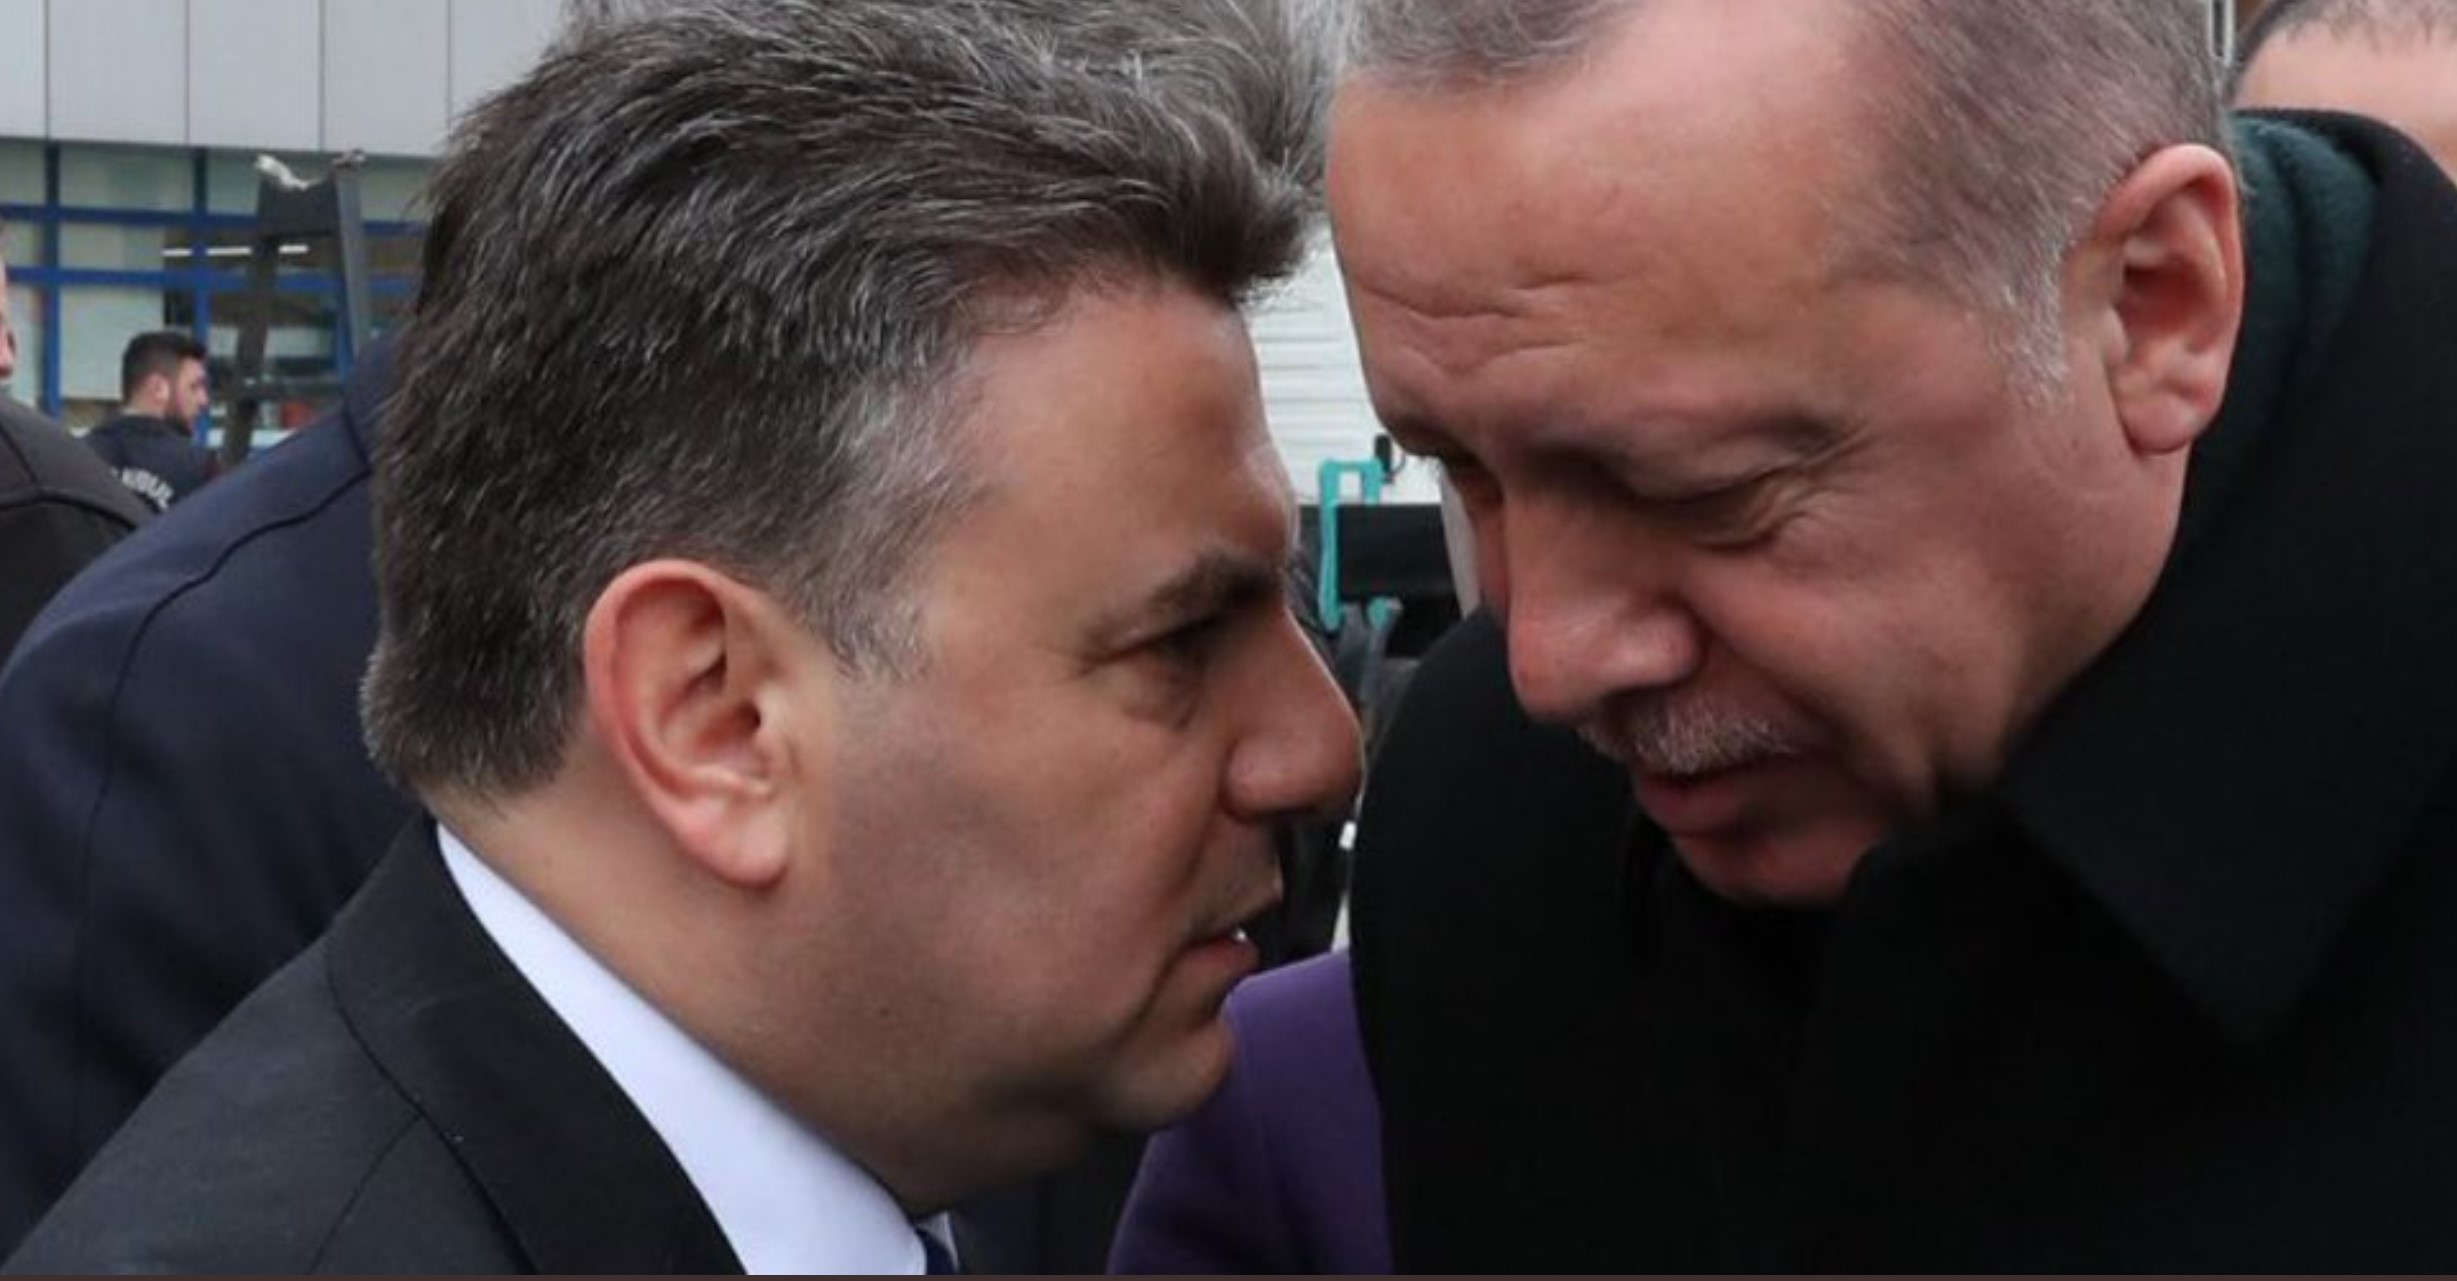 Turkish President Erdoğan uses sex tapes to advance his politics, get rid of opponents